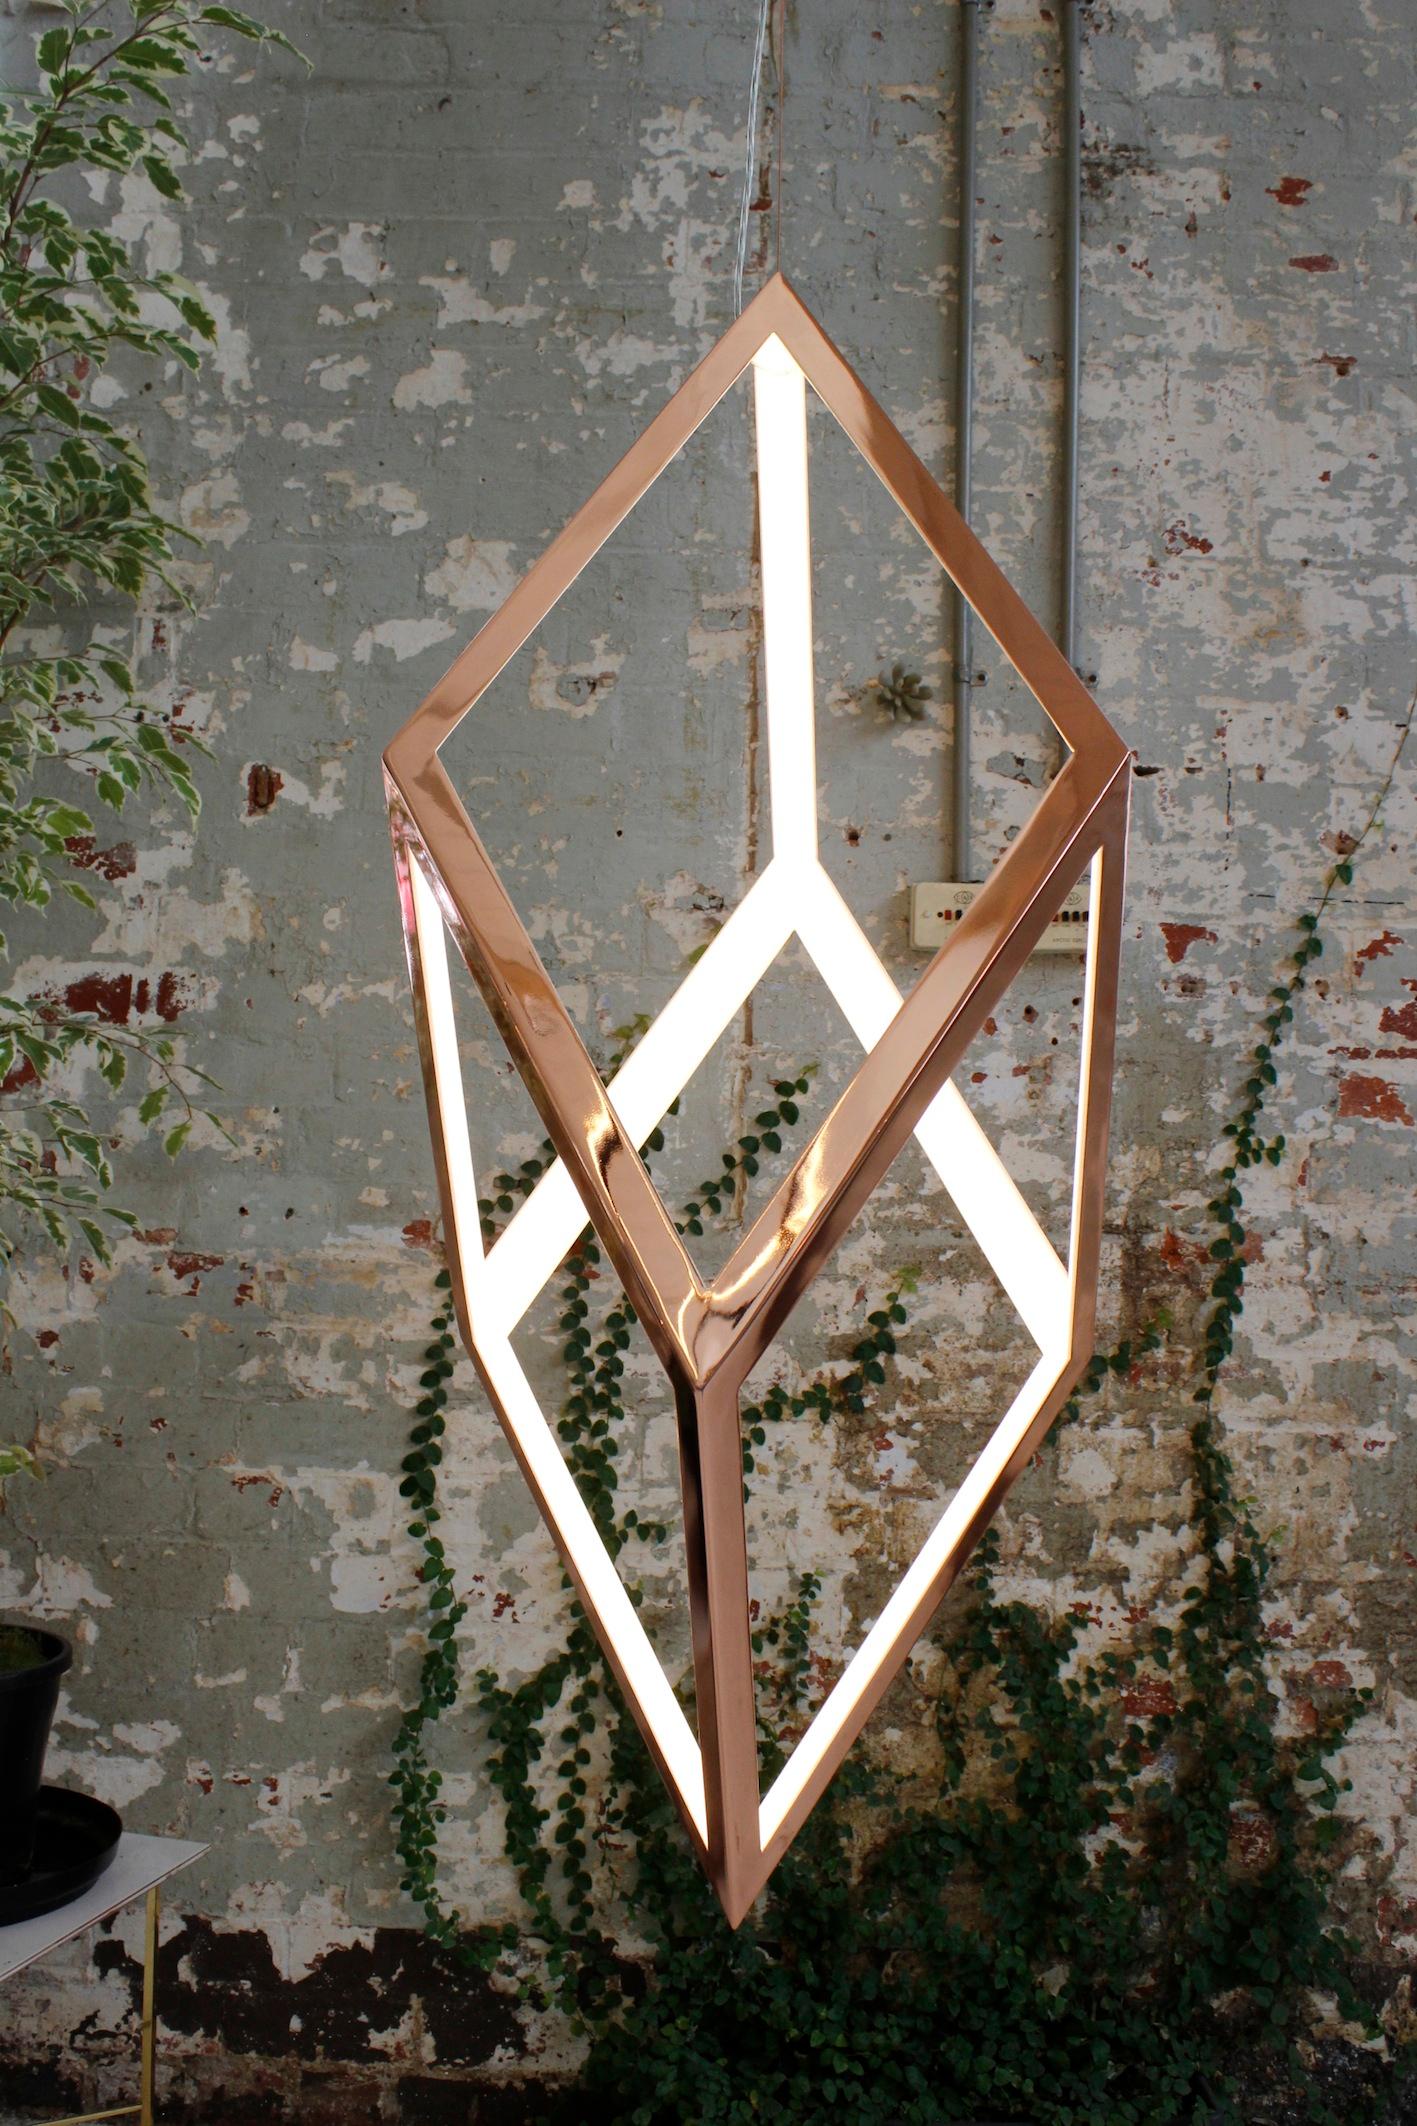 Contemporary Geometric brass or iron light pendant - ORP by Christopher Boots

Oblique Rhombic Prism is a pared-back structure that allows sacred geometry and light to come together as one. ORP emphasises simplicity and form, connecting elements